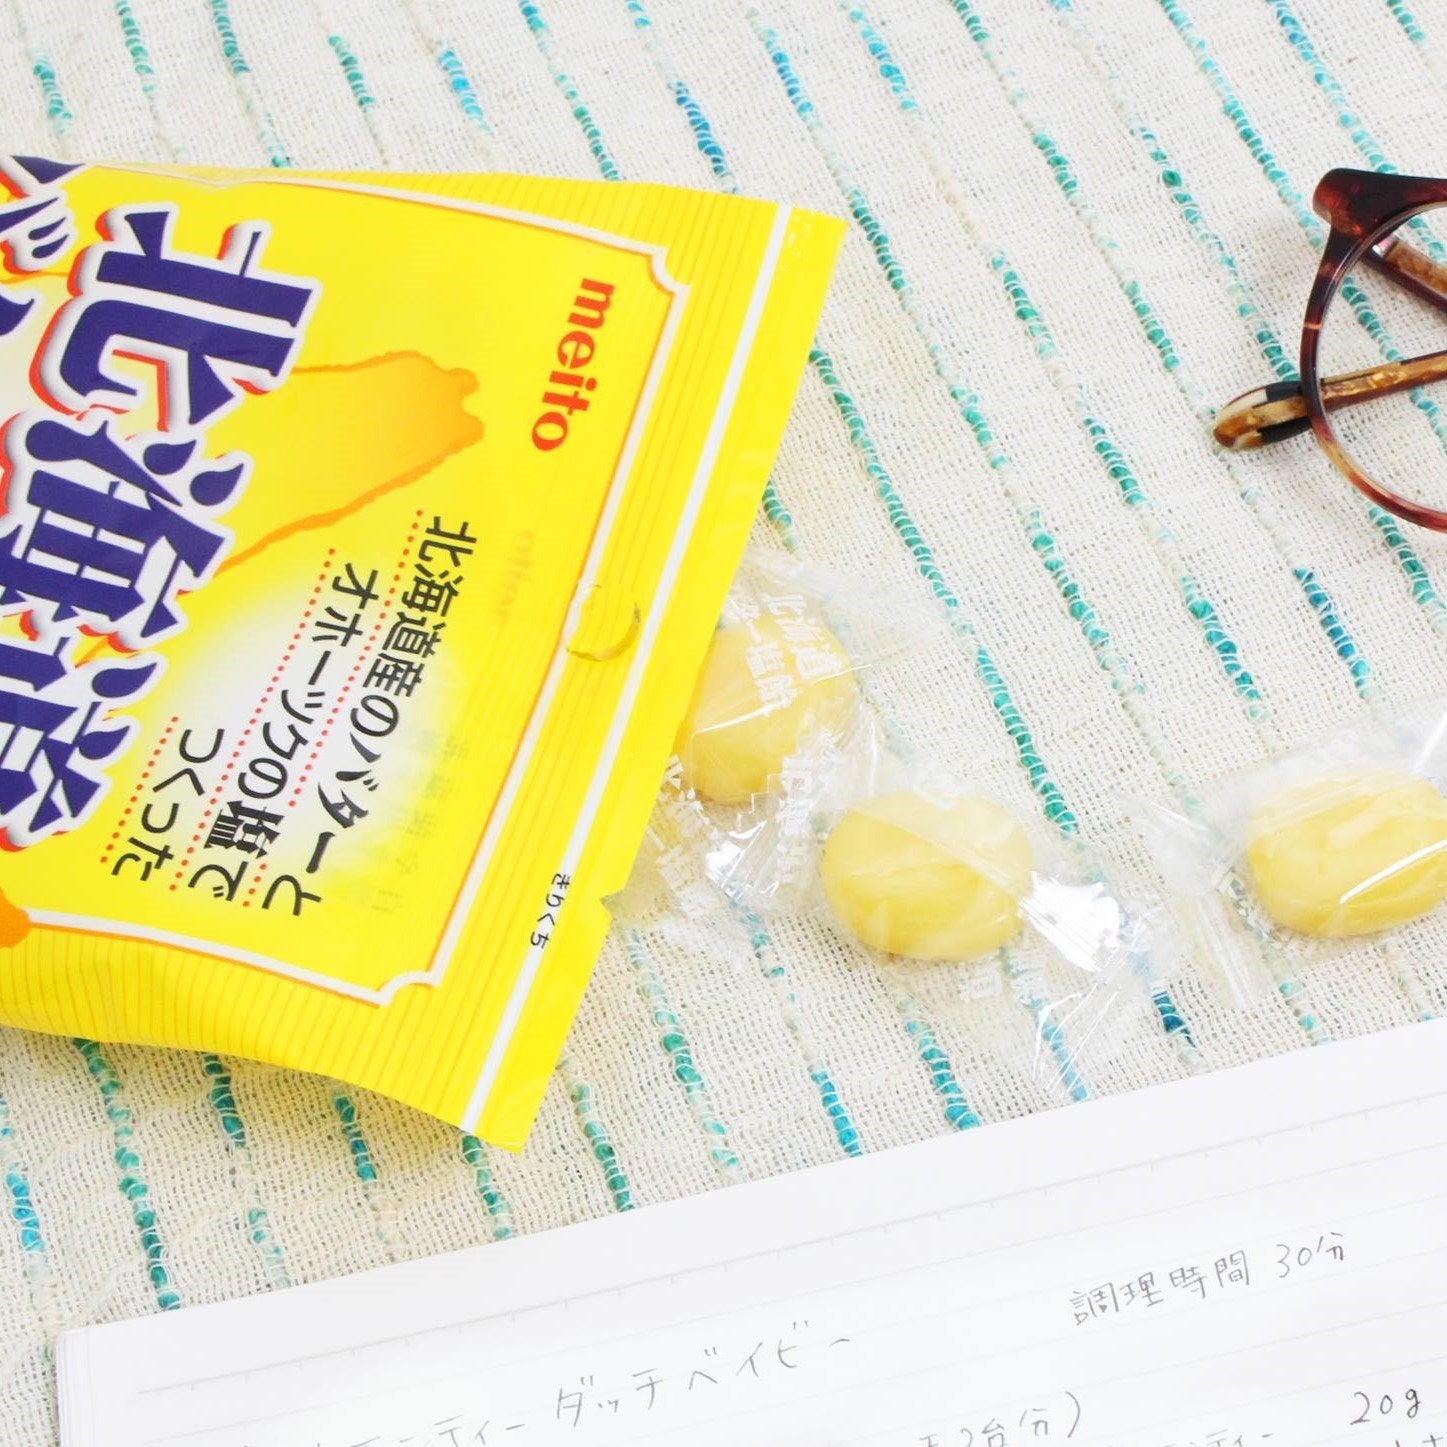 Meito Salted Hokkaido Butter Candy Salty Buttery Hard Candy 90g